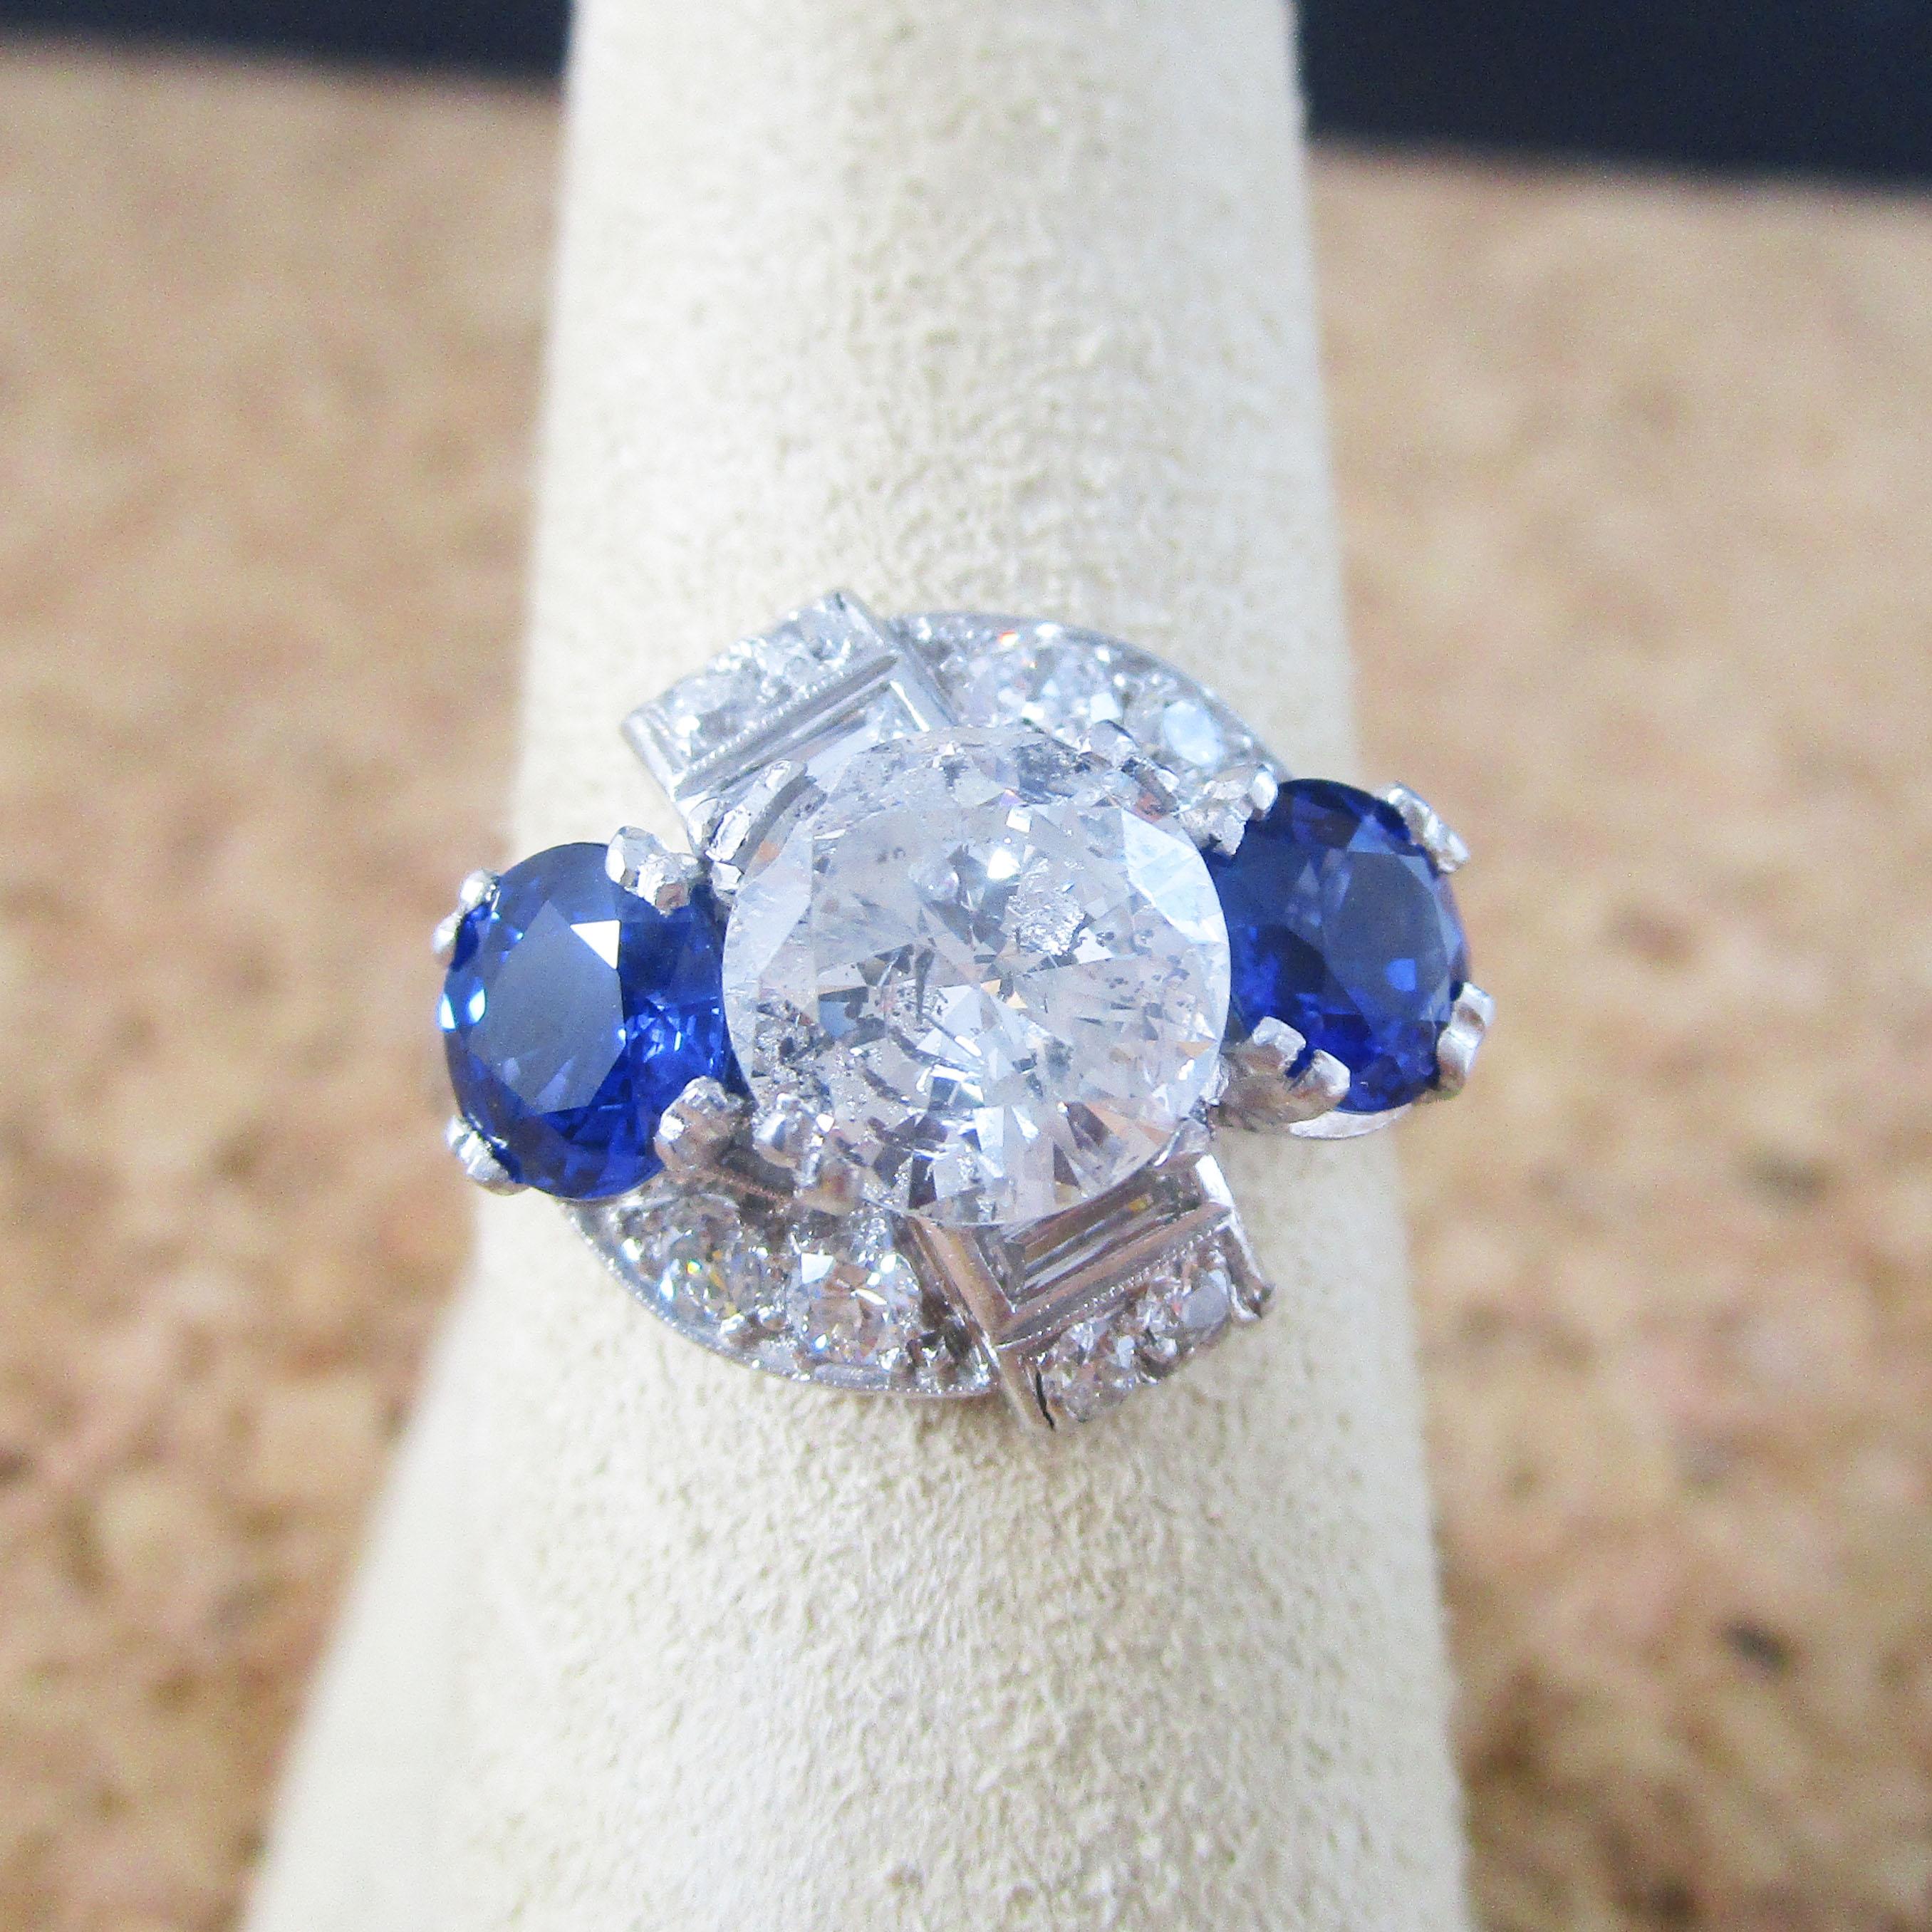 This absolutely breathtaking Art Deco ring is in bright platinum and features a killer 1.75 carat brilliant white diamond center flanked by two gorgeous royal blue sapphires. The ring is incredibly well made and the platinum setting is an all